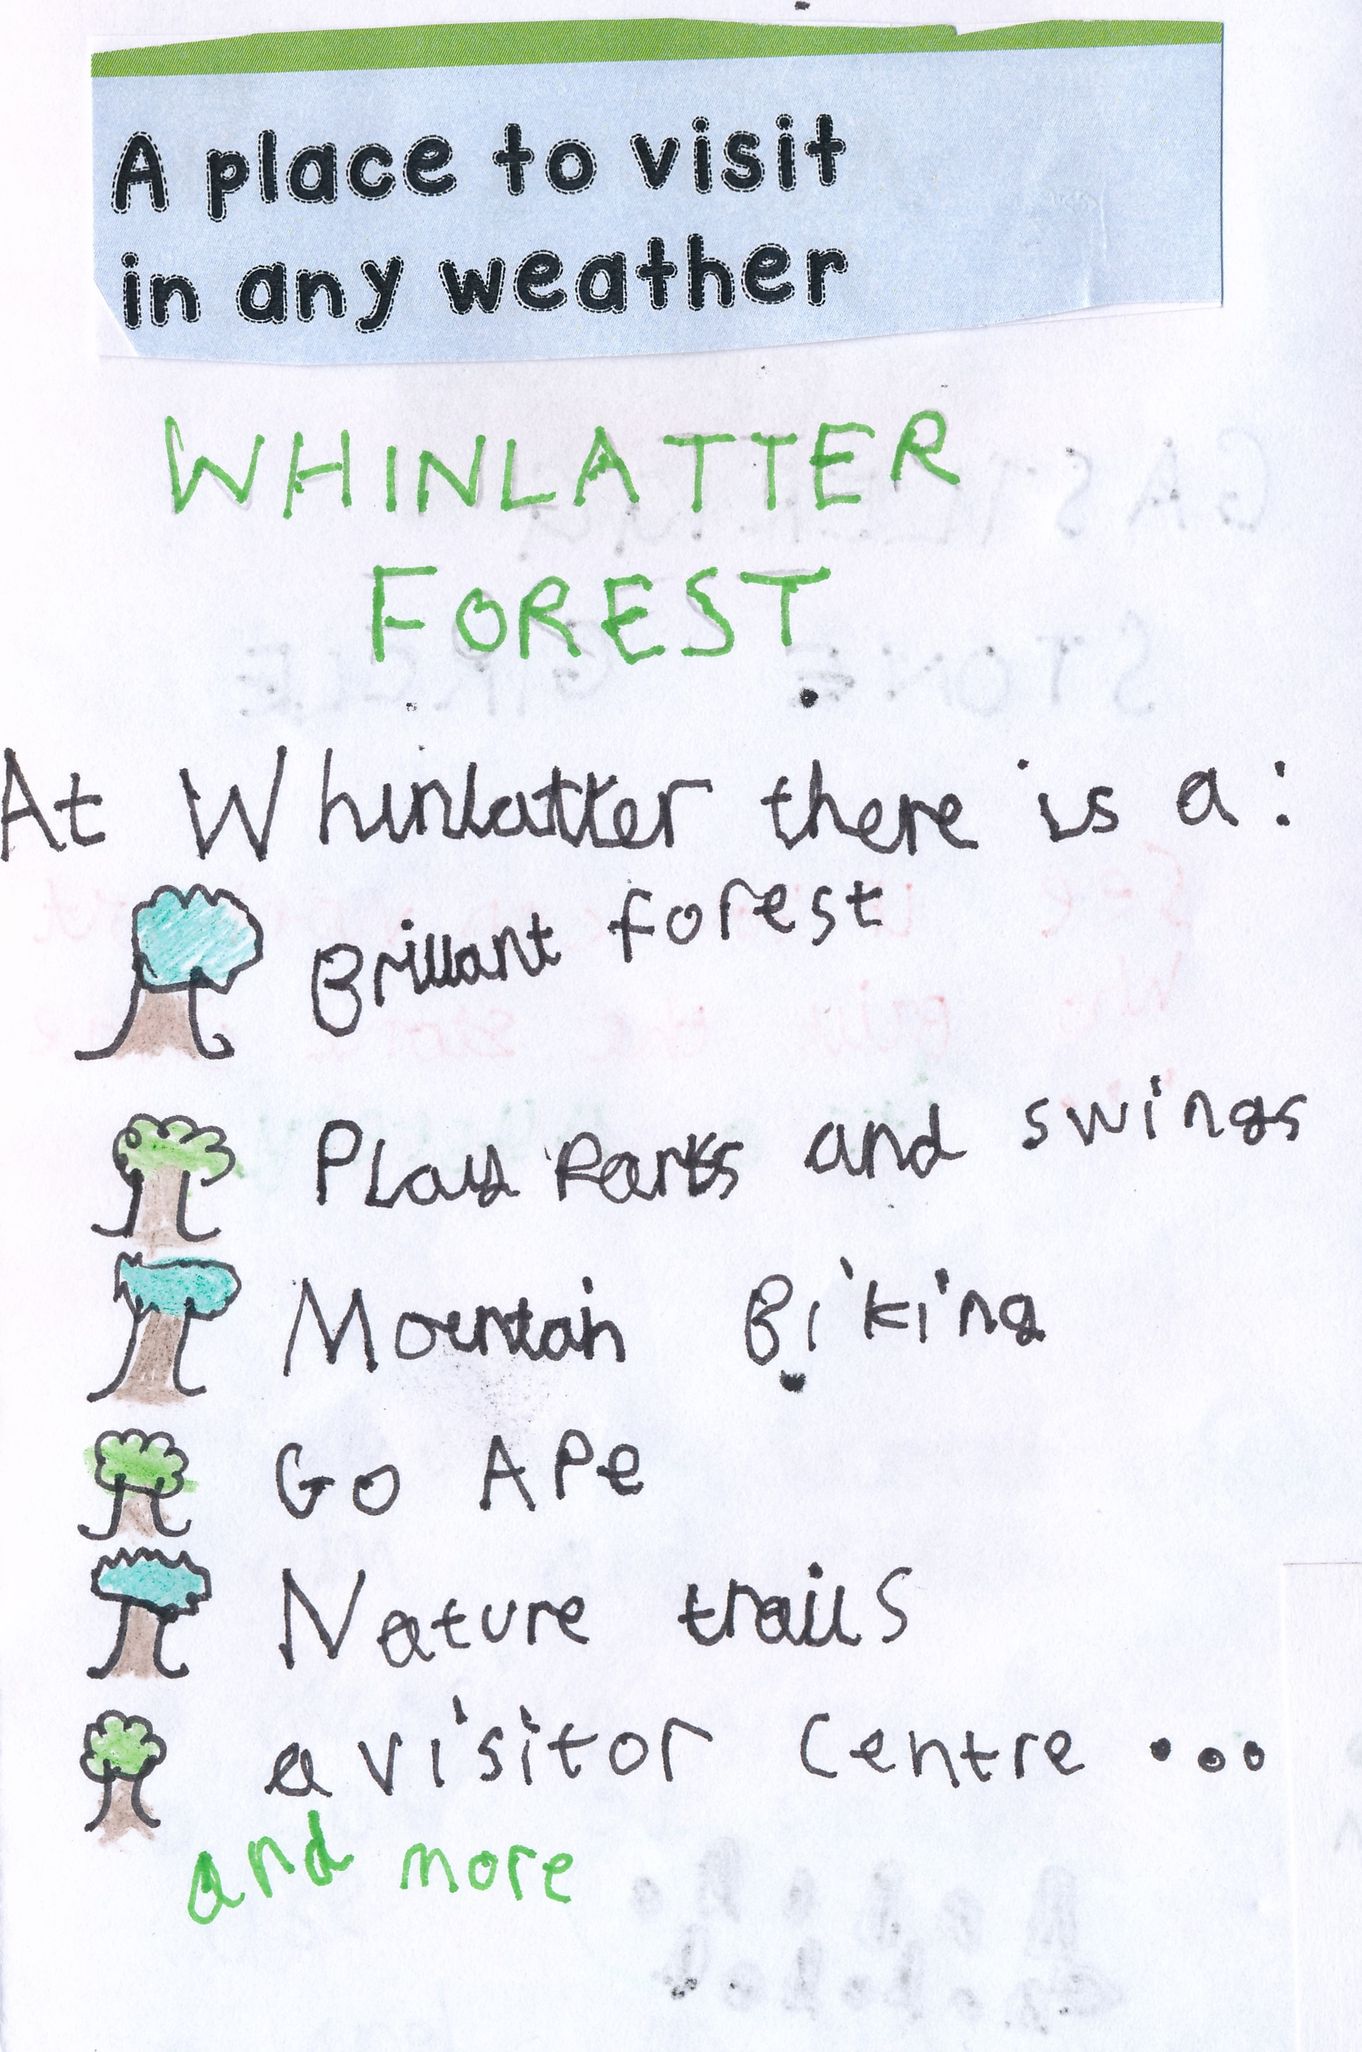 there's lots to do at whinlatter.jpg